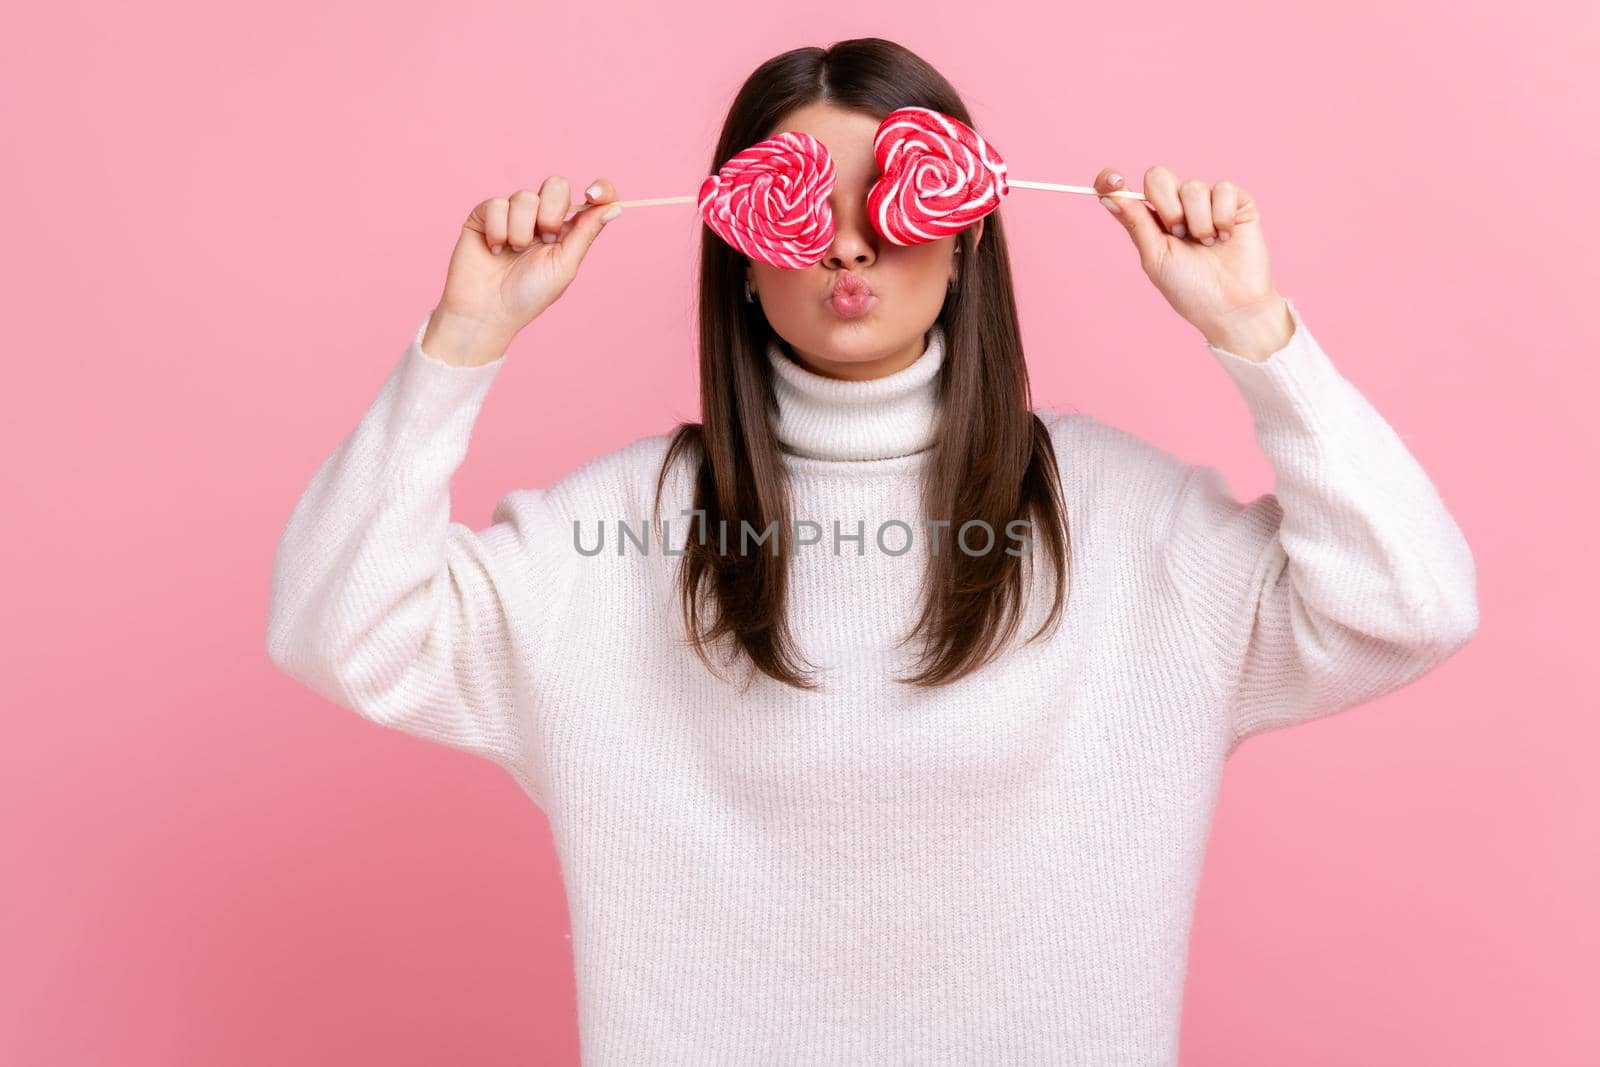 Portrait of playful childish romantic female covering eyes with sugary candies and sending air kisses, wearing white casual style sweater. Indoor studio shot isolated on pink background.